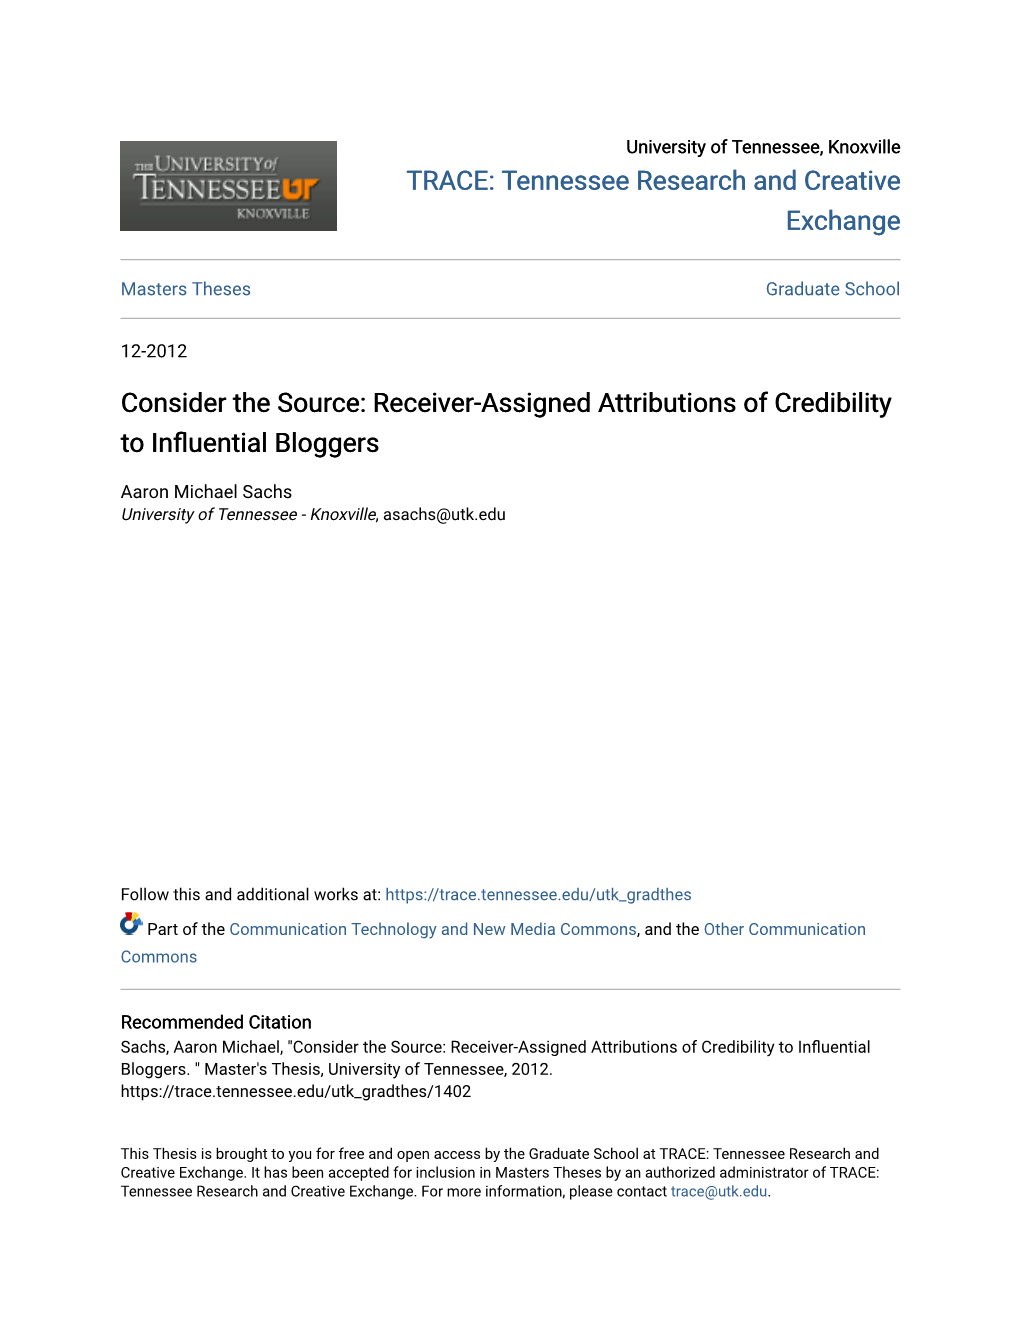 Receiver-Assigned Attributions of Credibility to Influential Bloggers